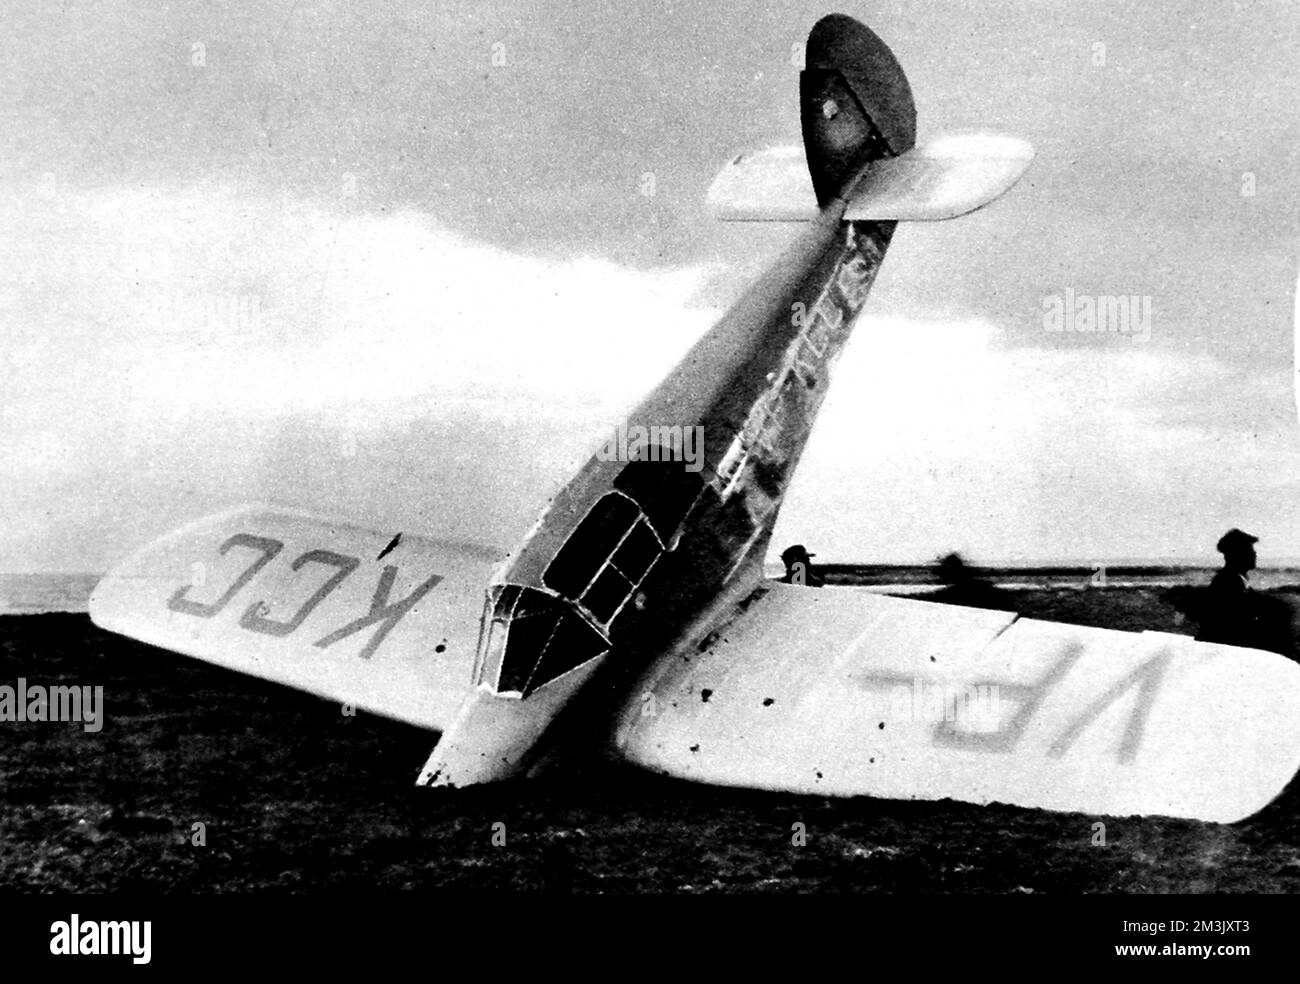 Photograph showing Mrs. Beryl Markham's (1903-1986) aeroplane stuck in a bog on Cape Breton Island, Nova Scotia, 1936.      This was the end of Mrs. Markham's flight from RAF Abingdon, in England, to North America, whereby she became the first woman to fly the Atlantic solo from East to West.  Mrs. Markham was, fortunately, unhurt in the landing.     Date: 1936 Stock Photo